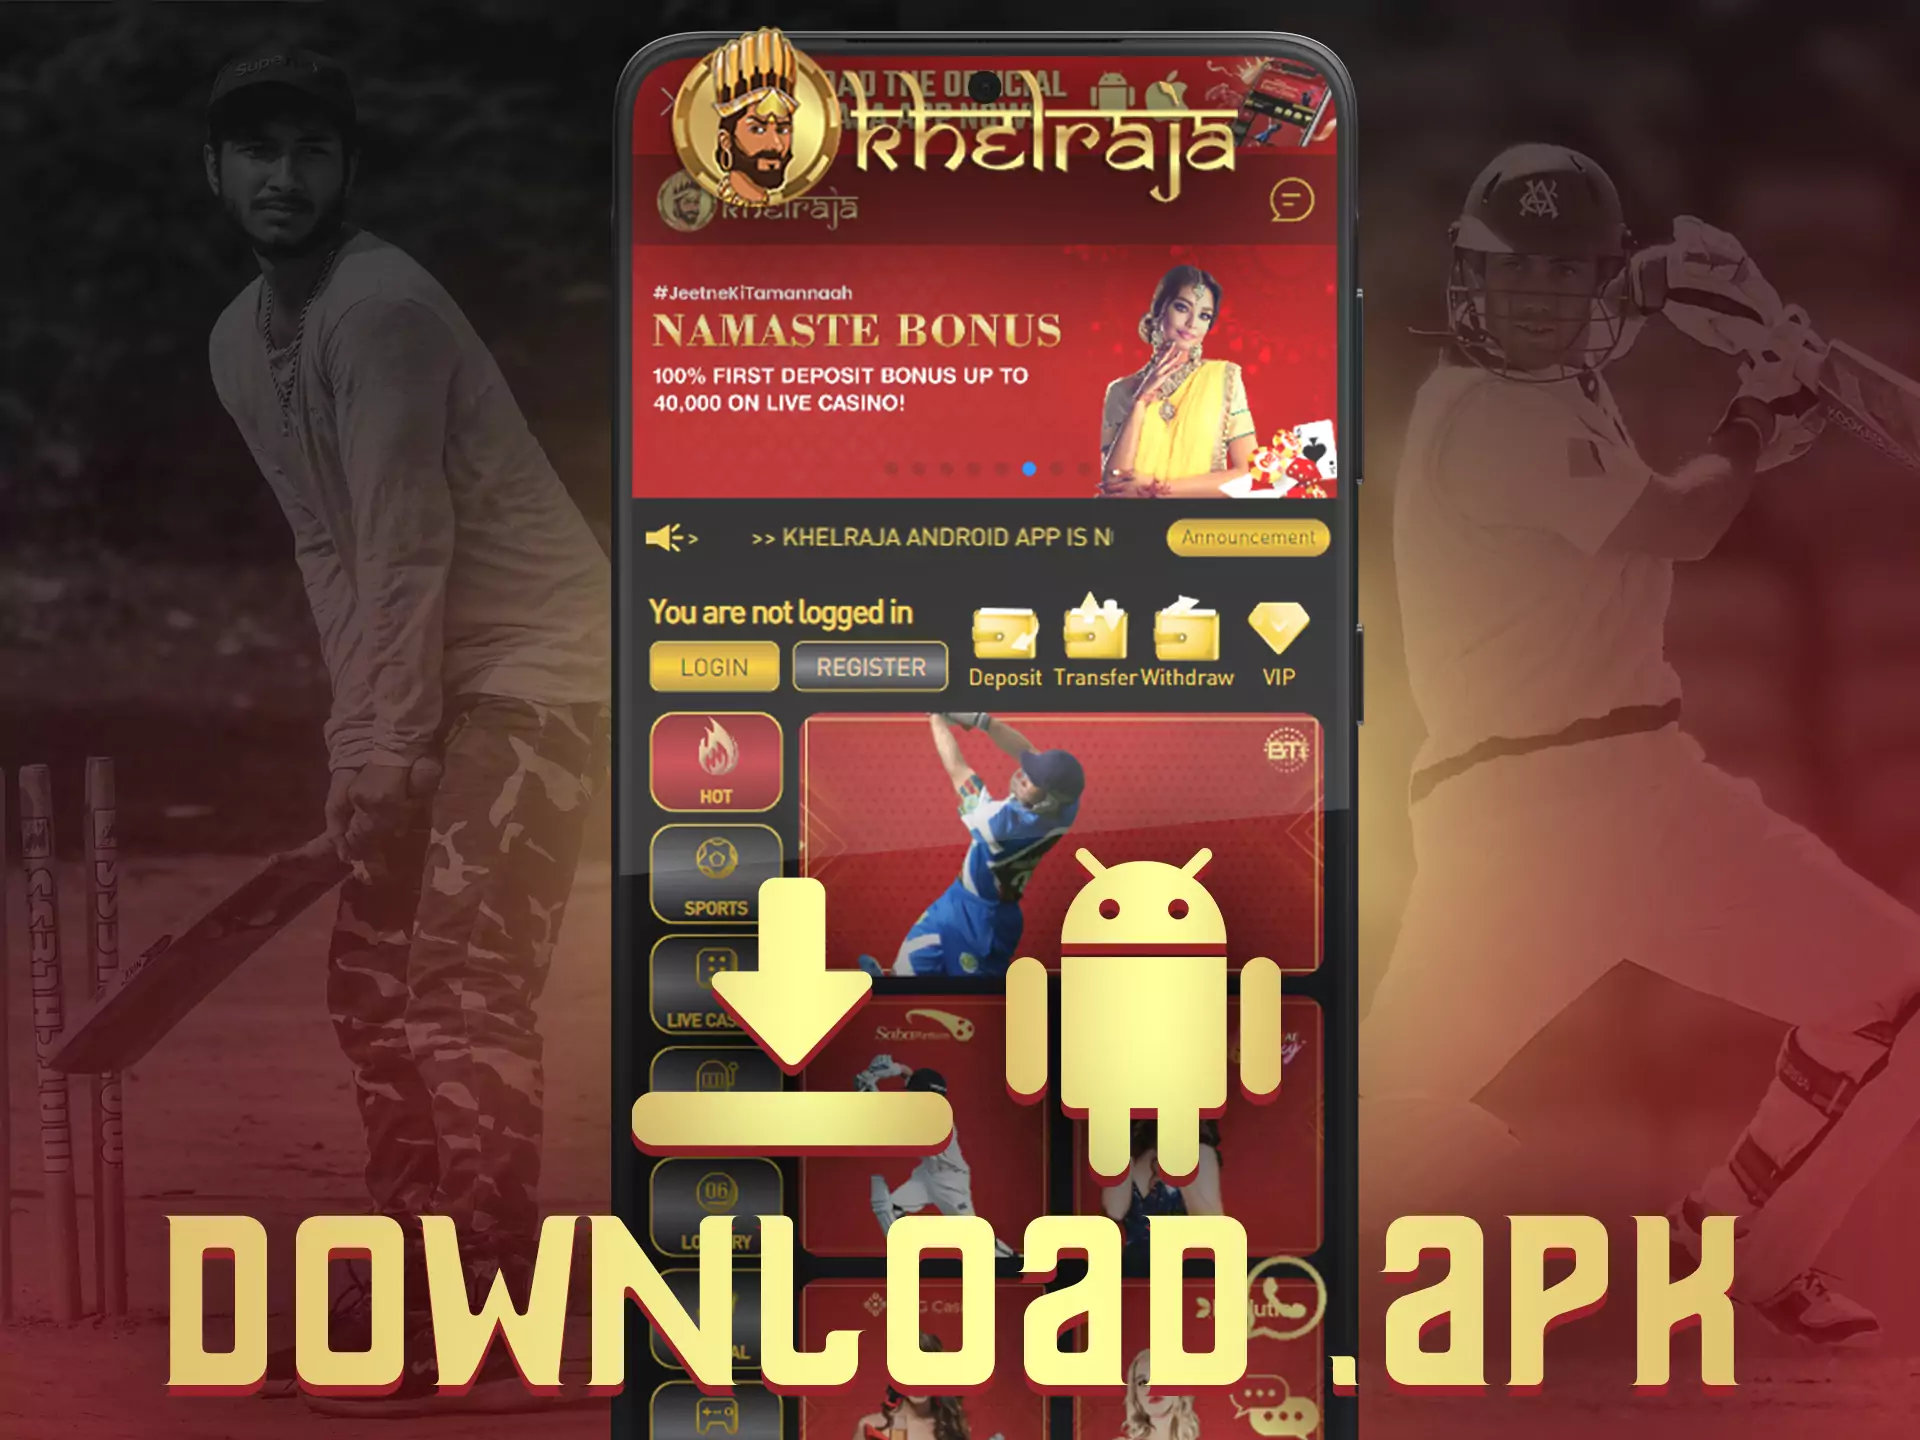 Install the Khelraja app for betting from your Android device.